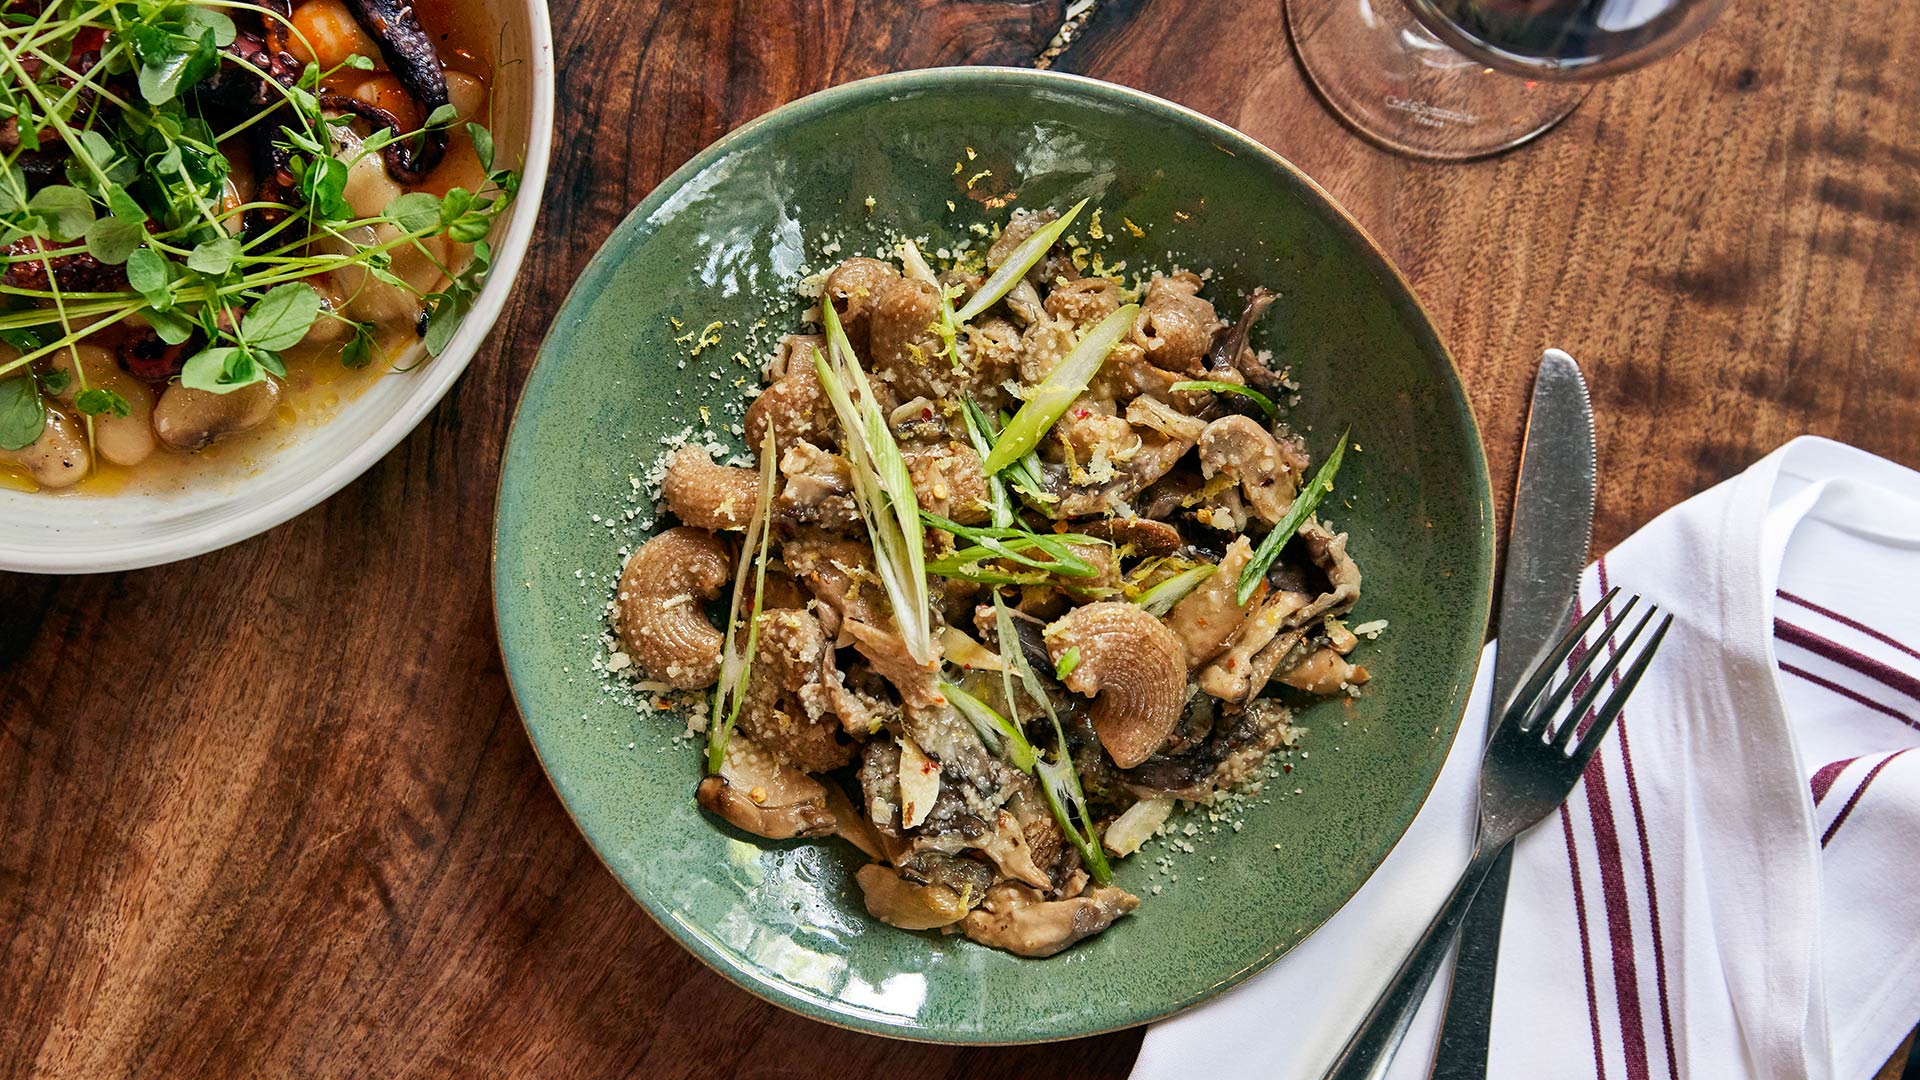 A pasta and mushroom dish at Feast & Floret in Hudson, New York